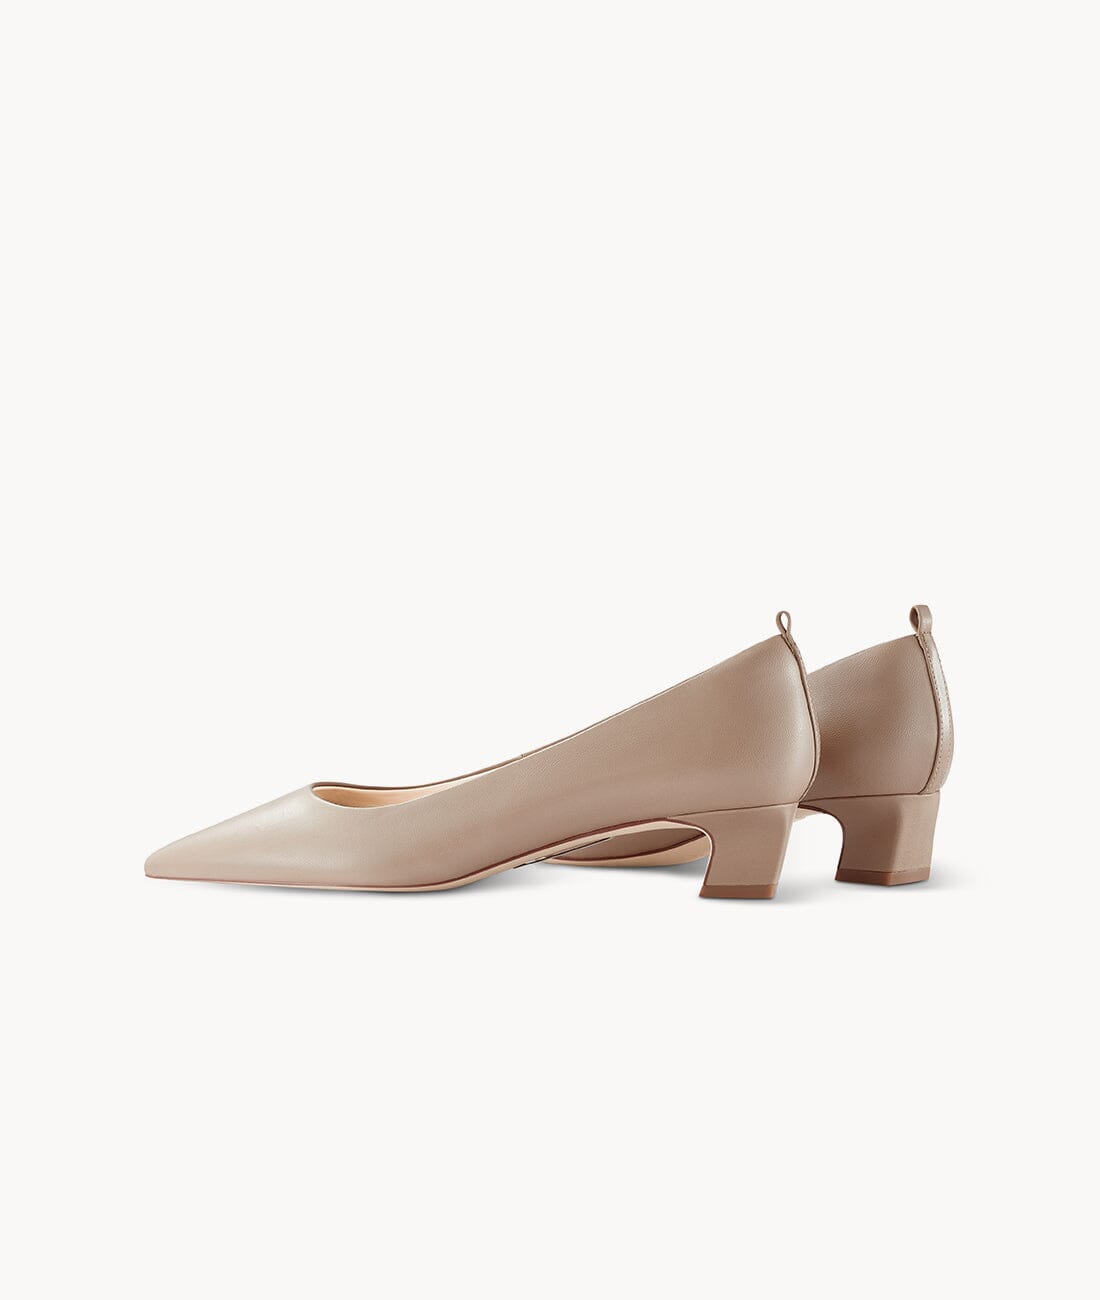 Nude close toed pointed toe heels